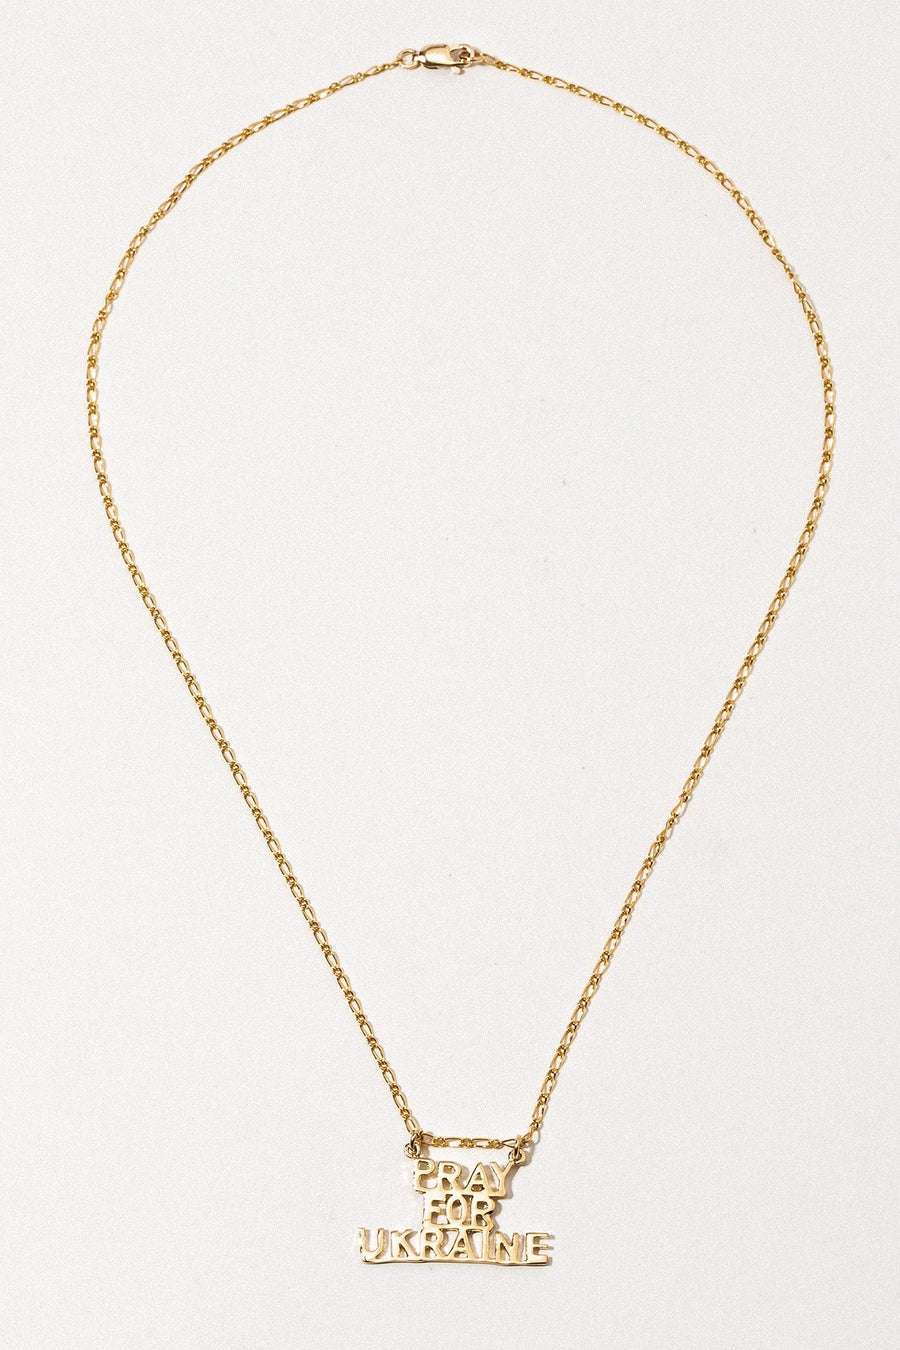 CGM Jewelry Gold / 18 Inches / FINAL SALE Pray For Ukraine Necklace